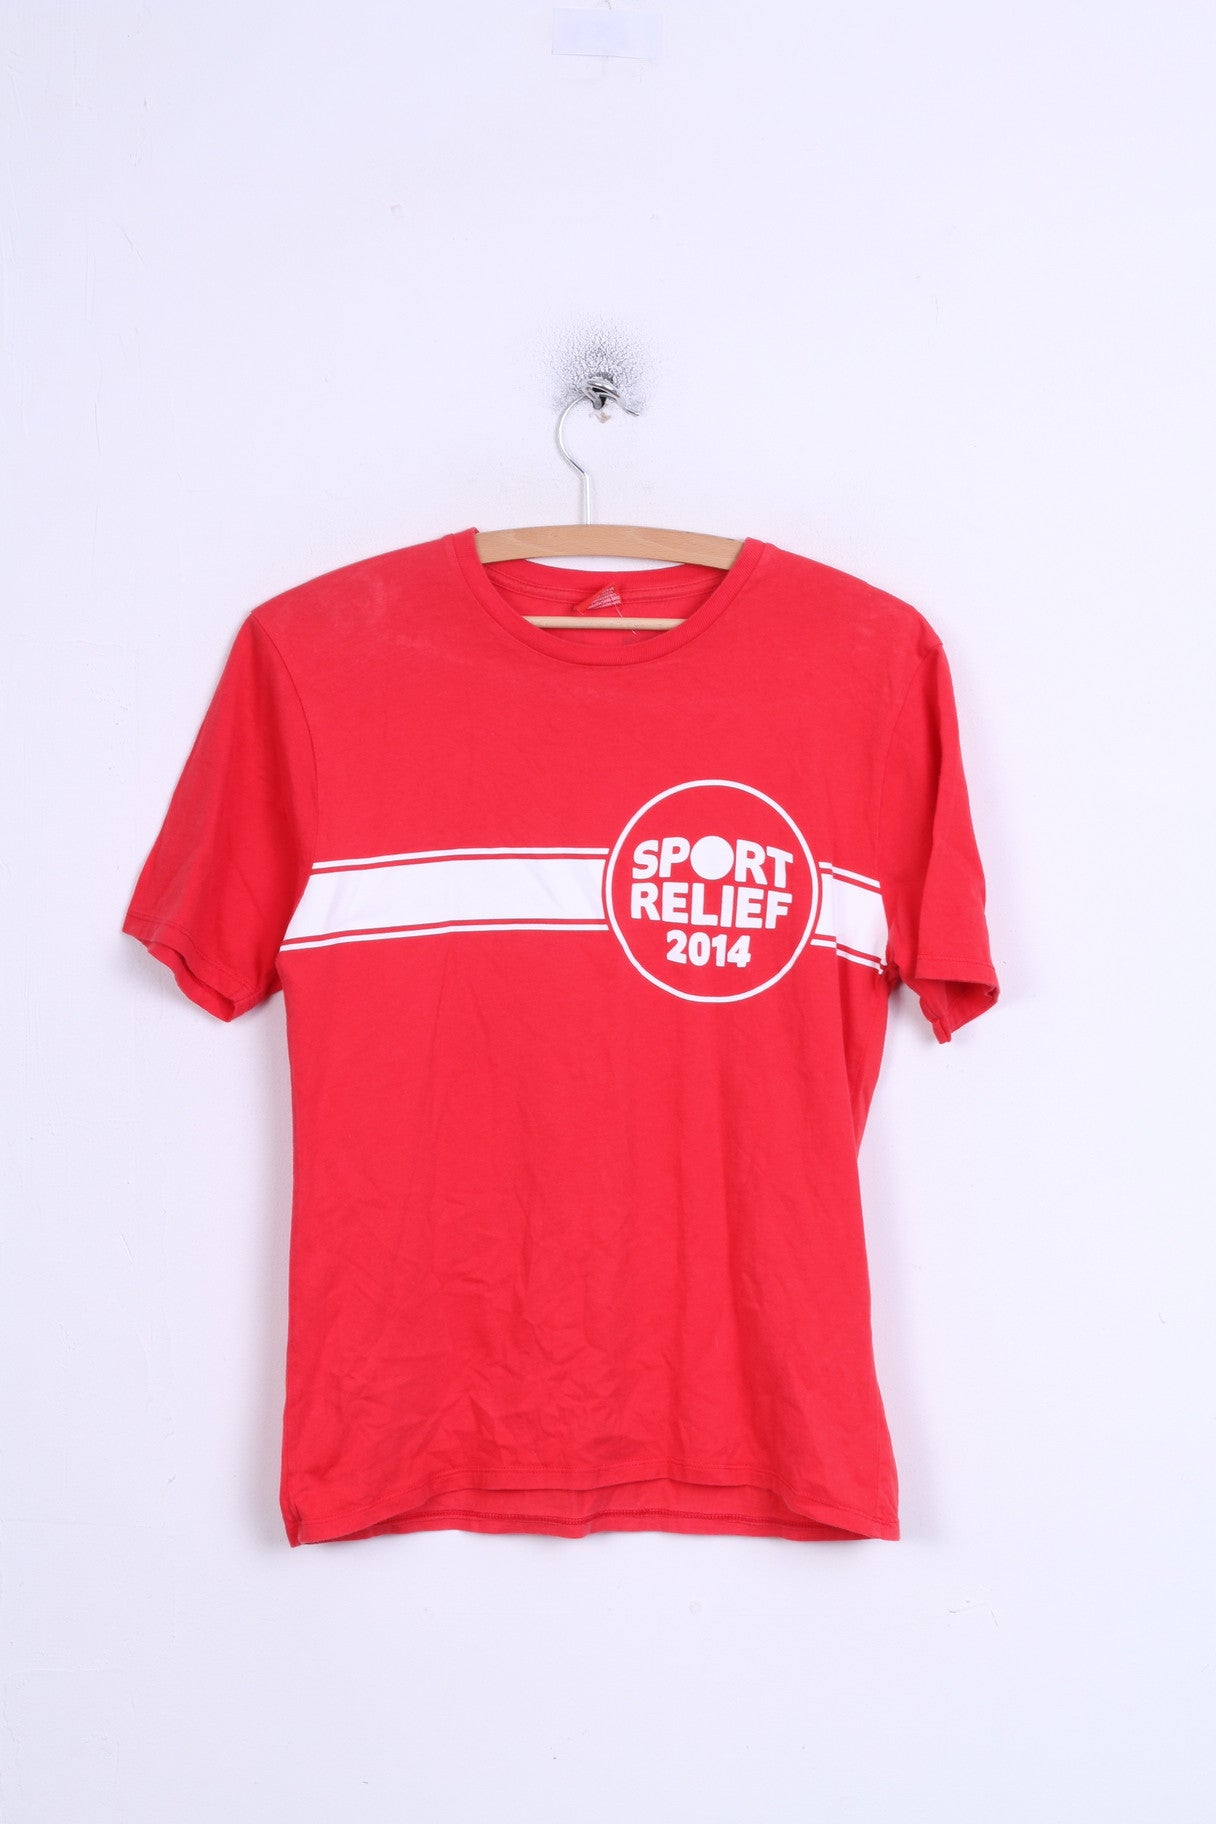 Sport Relief 2014 Womens XS T-Shirt Red Crew Neck Cotton Swim Run Cycle